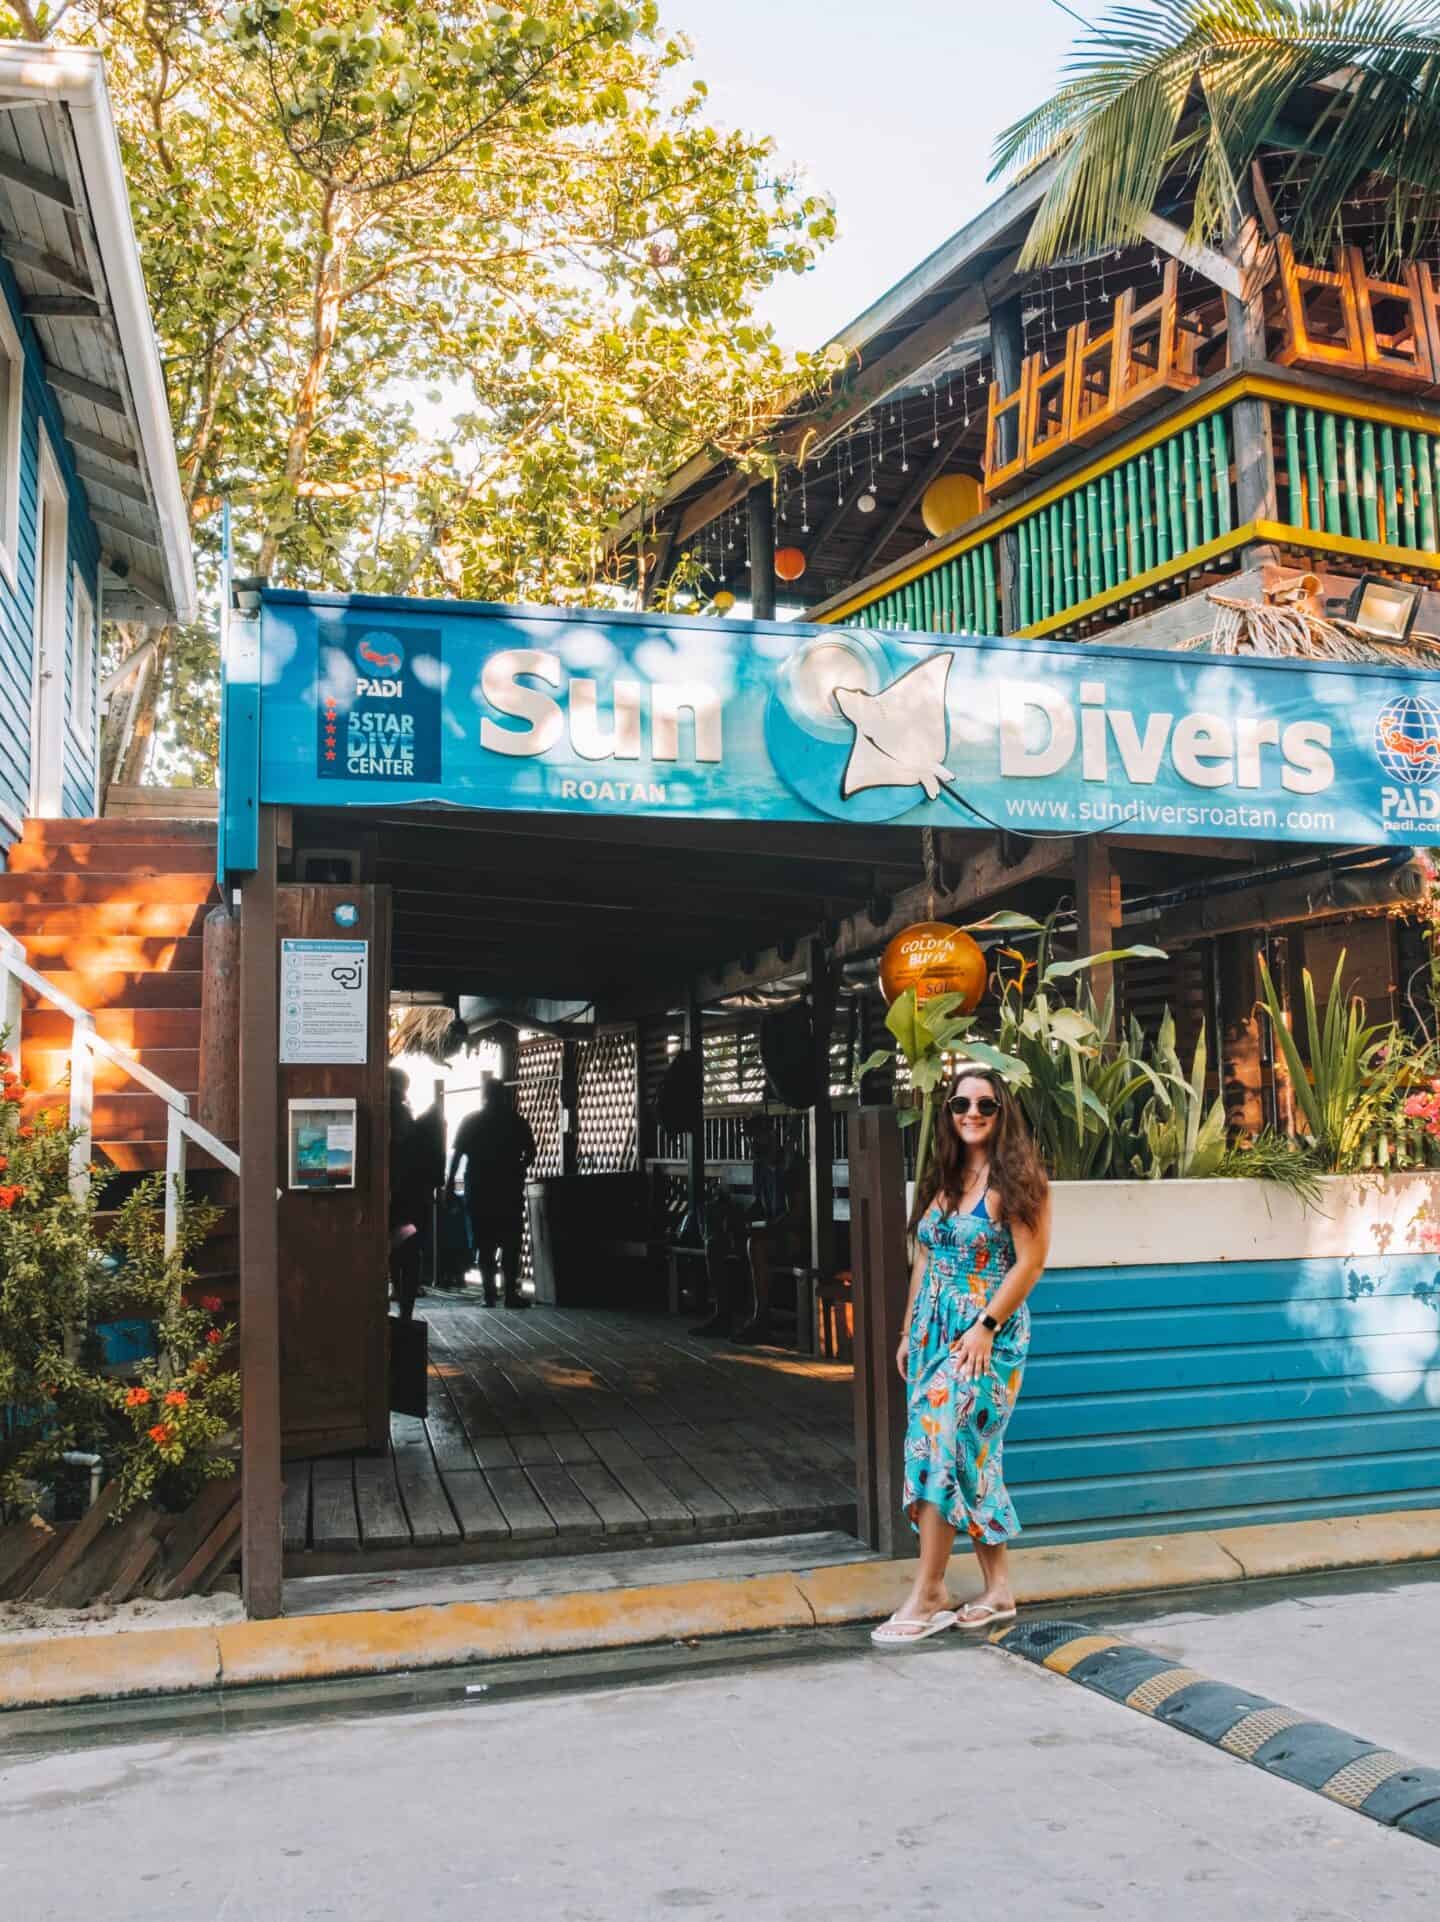 Blog post about scuba diving with Sun Divers